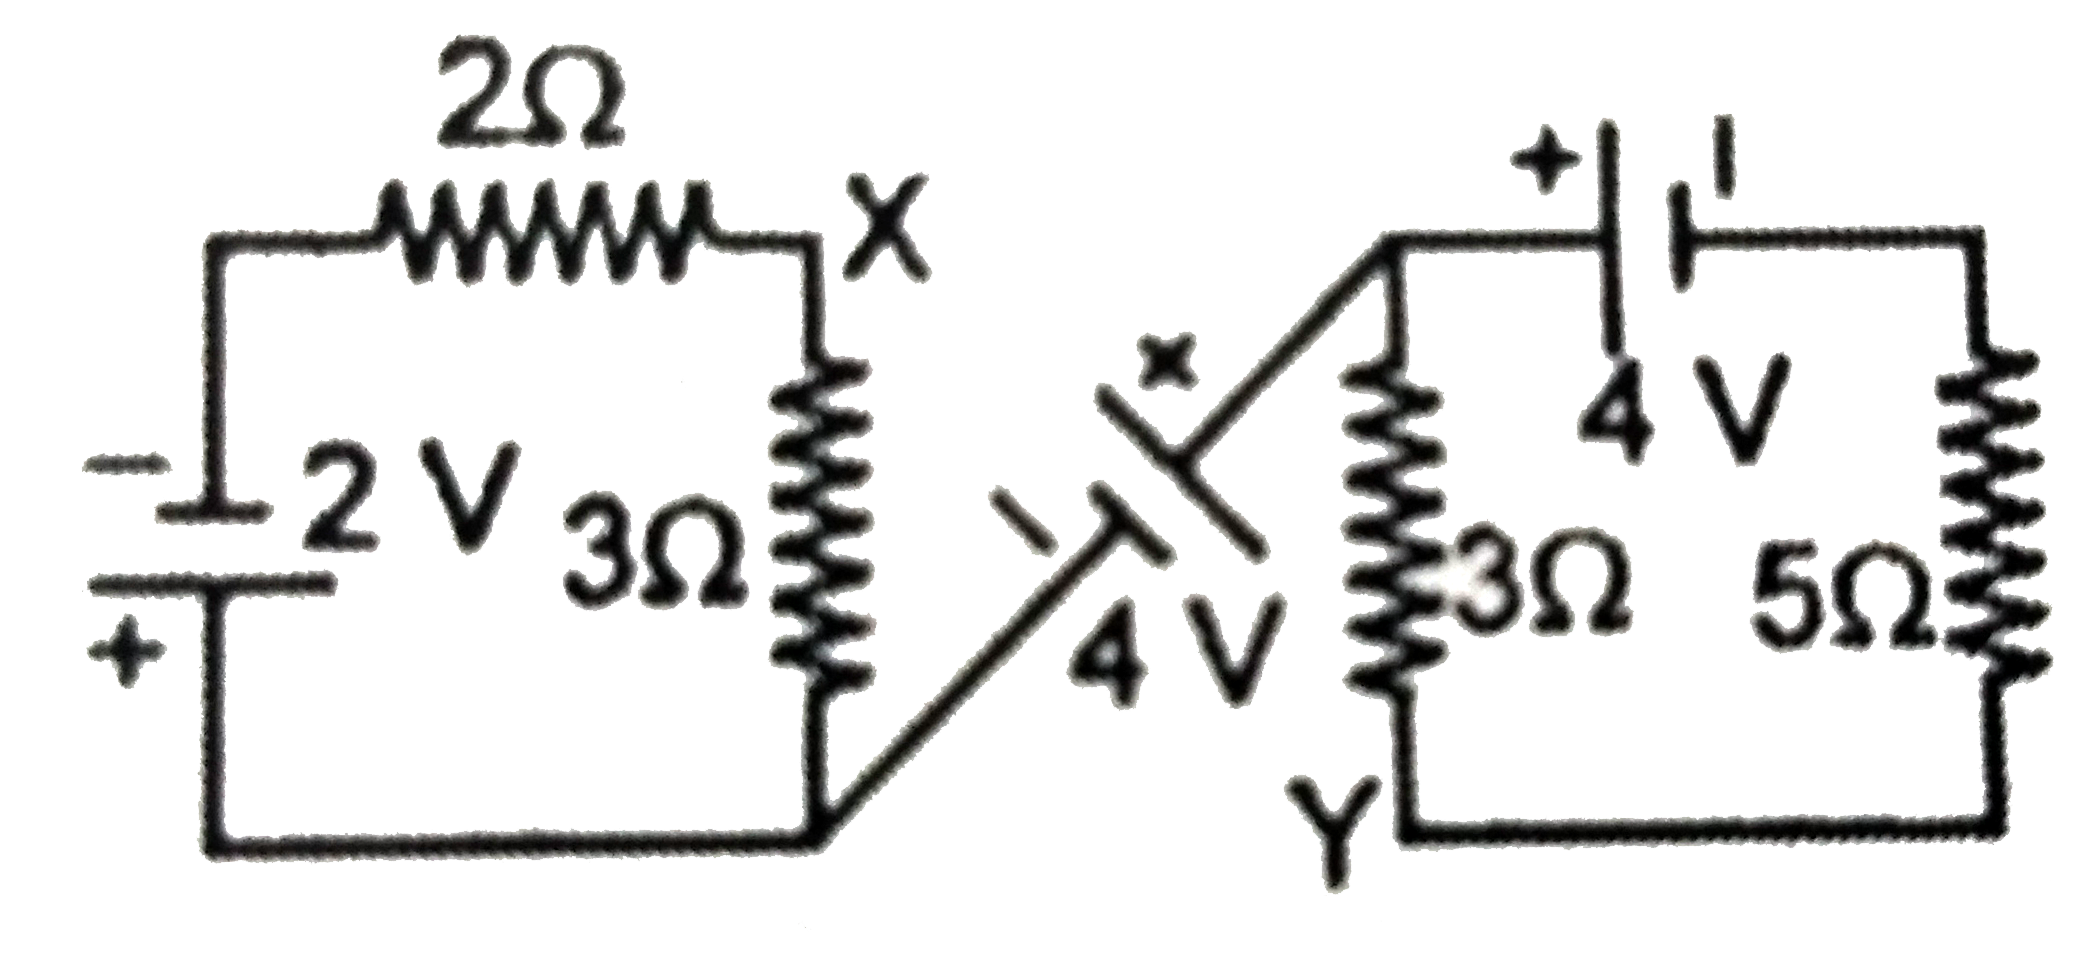 Determine the potential difference between X and Y in the circuit shown in Figure.